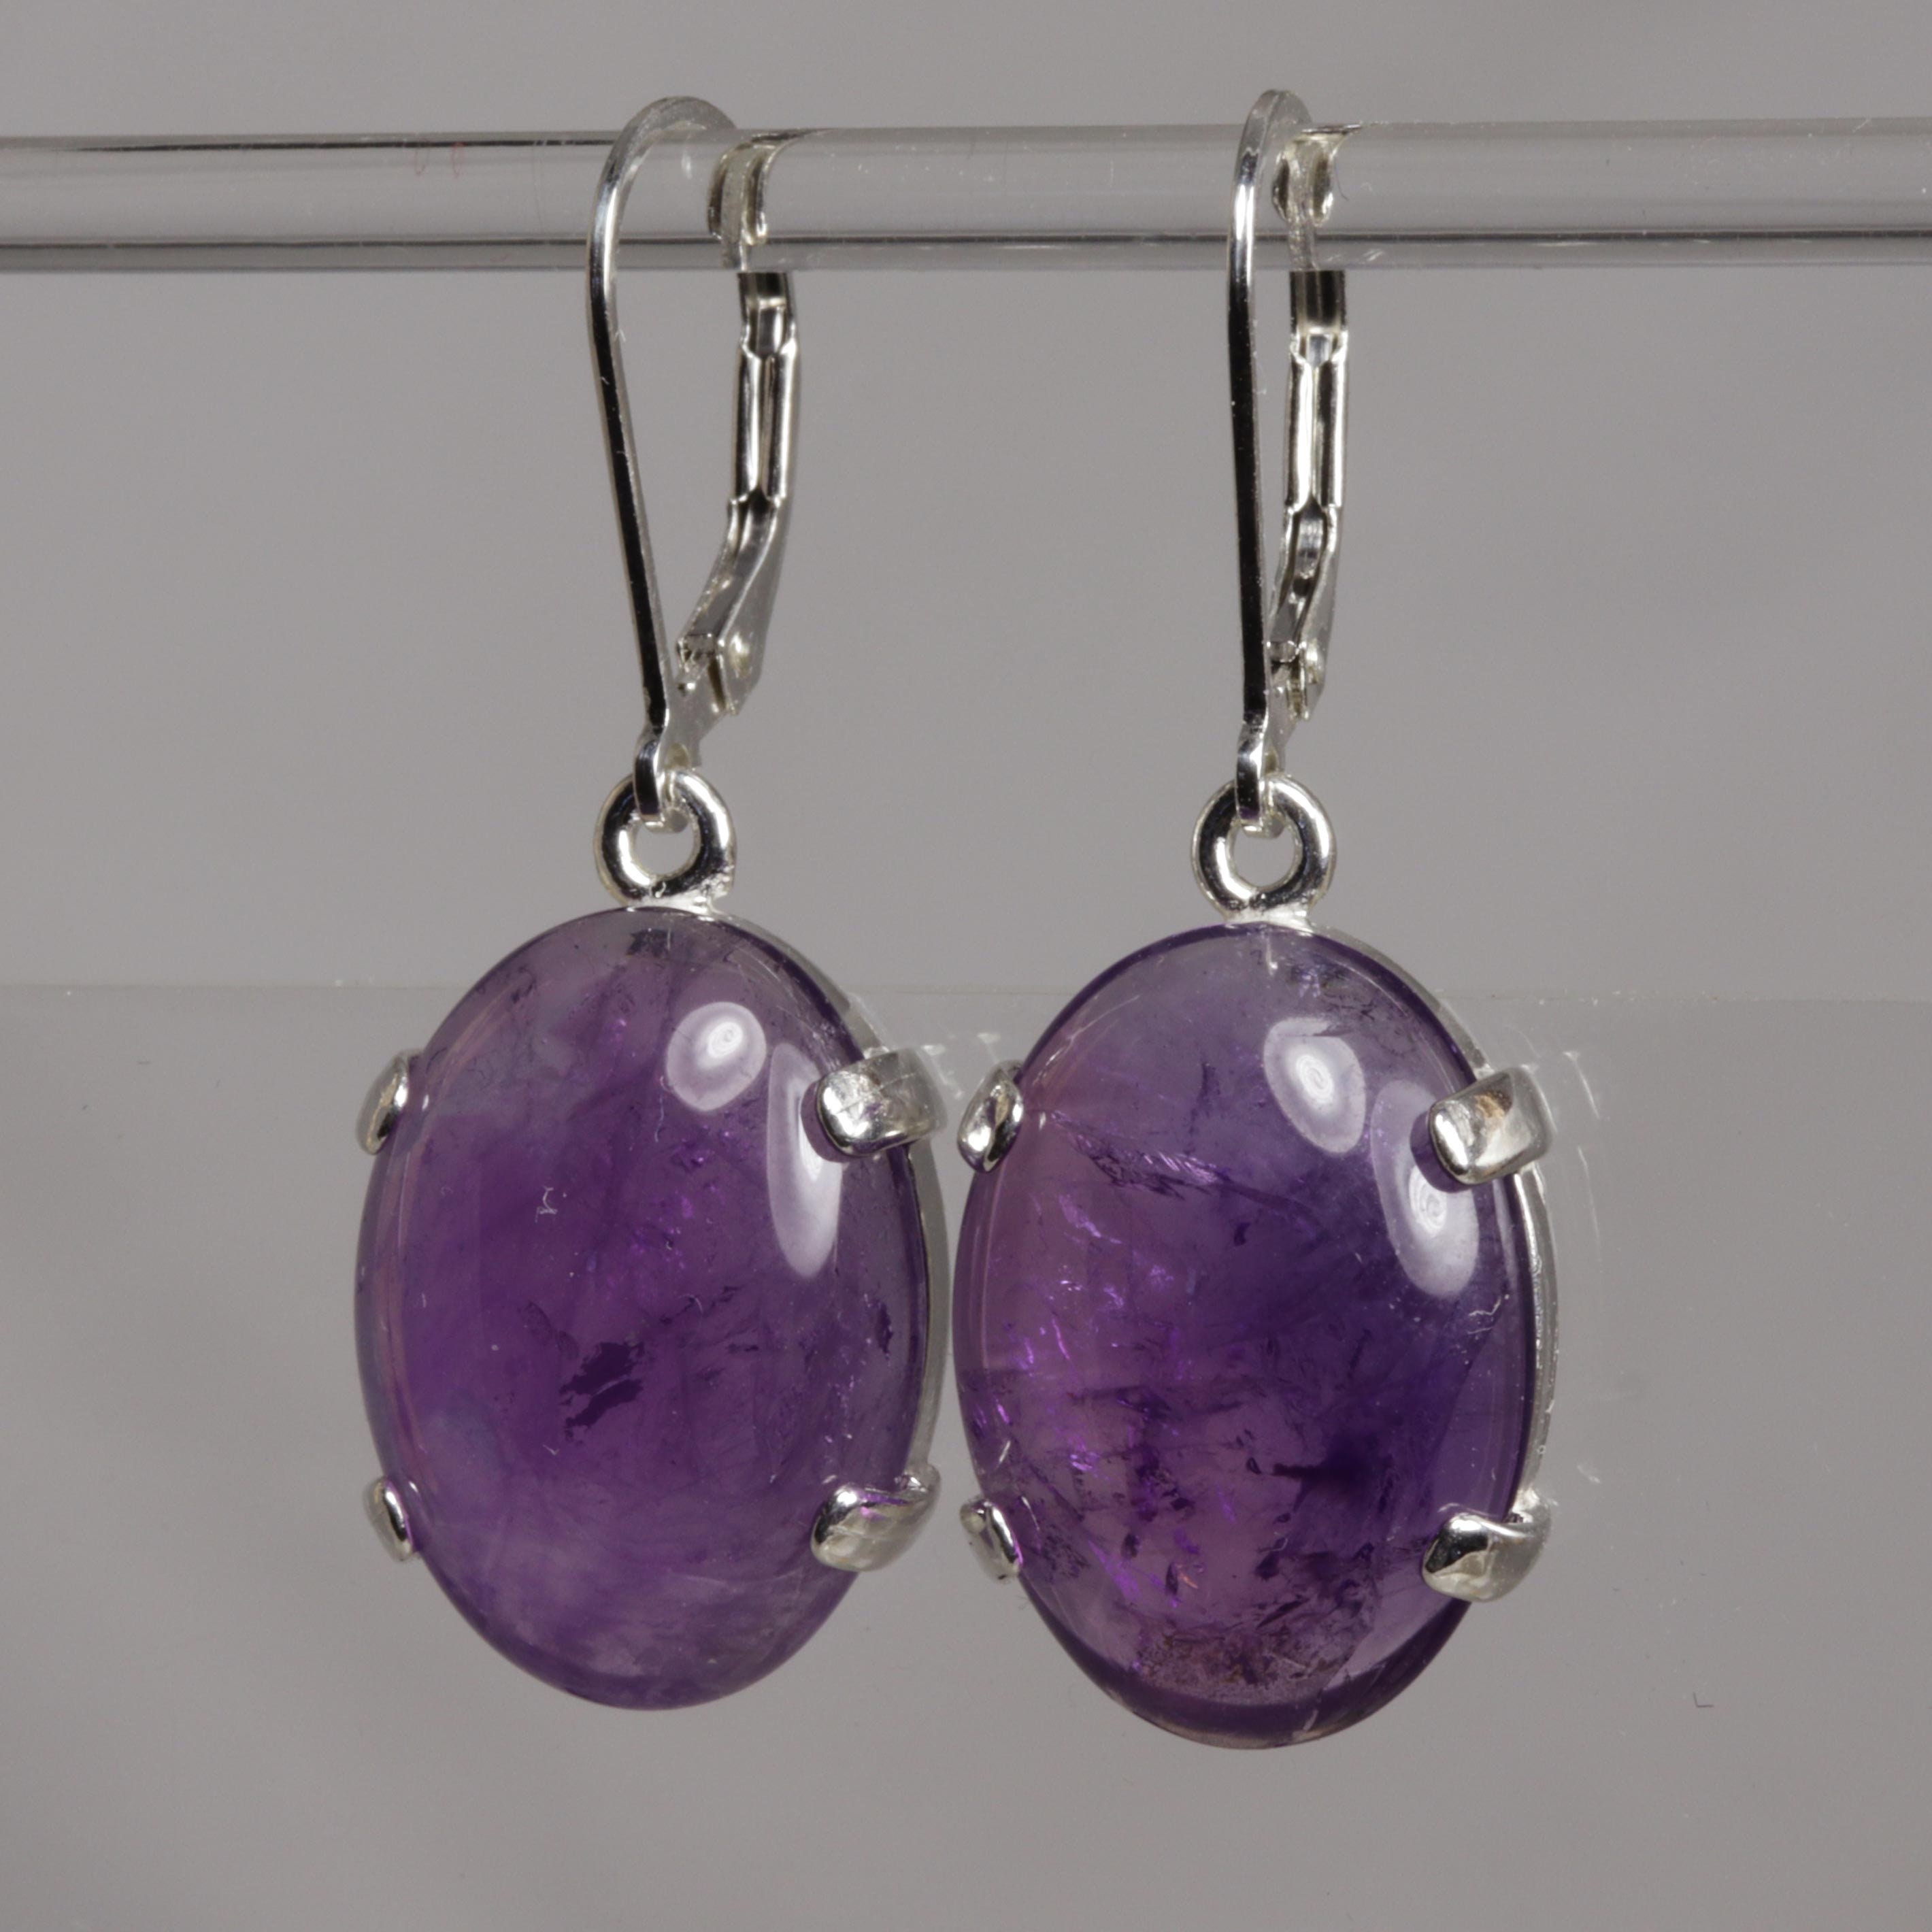 Free Gift Box Sterling Earrings Amethyst cabochons Gift Tag and Free Shipping